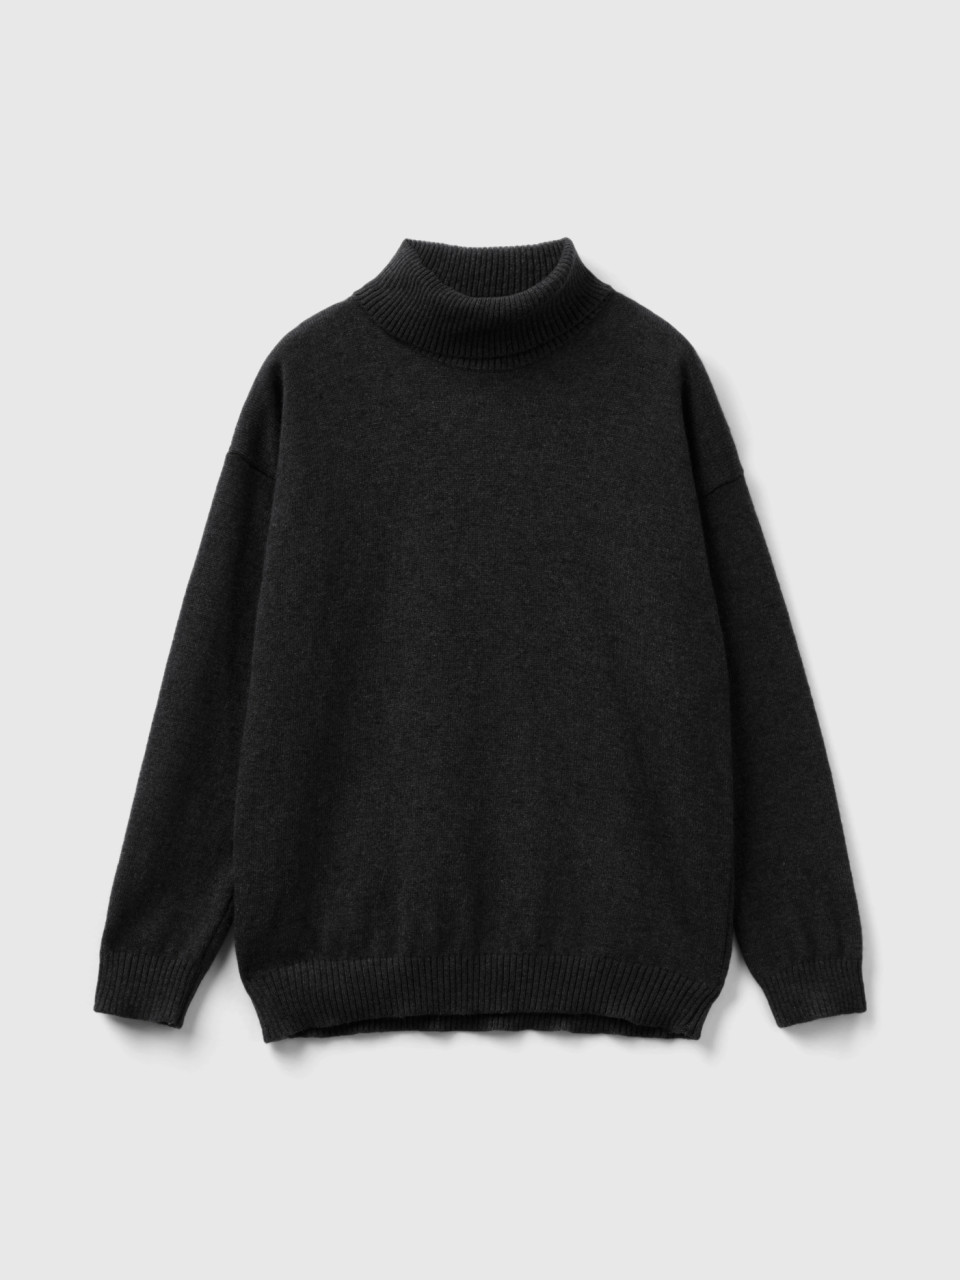 Benetton, Turtleneck Sweater In Cashmere And Wool Blend, Black, Kids